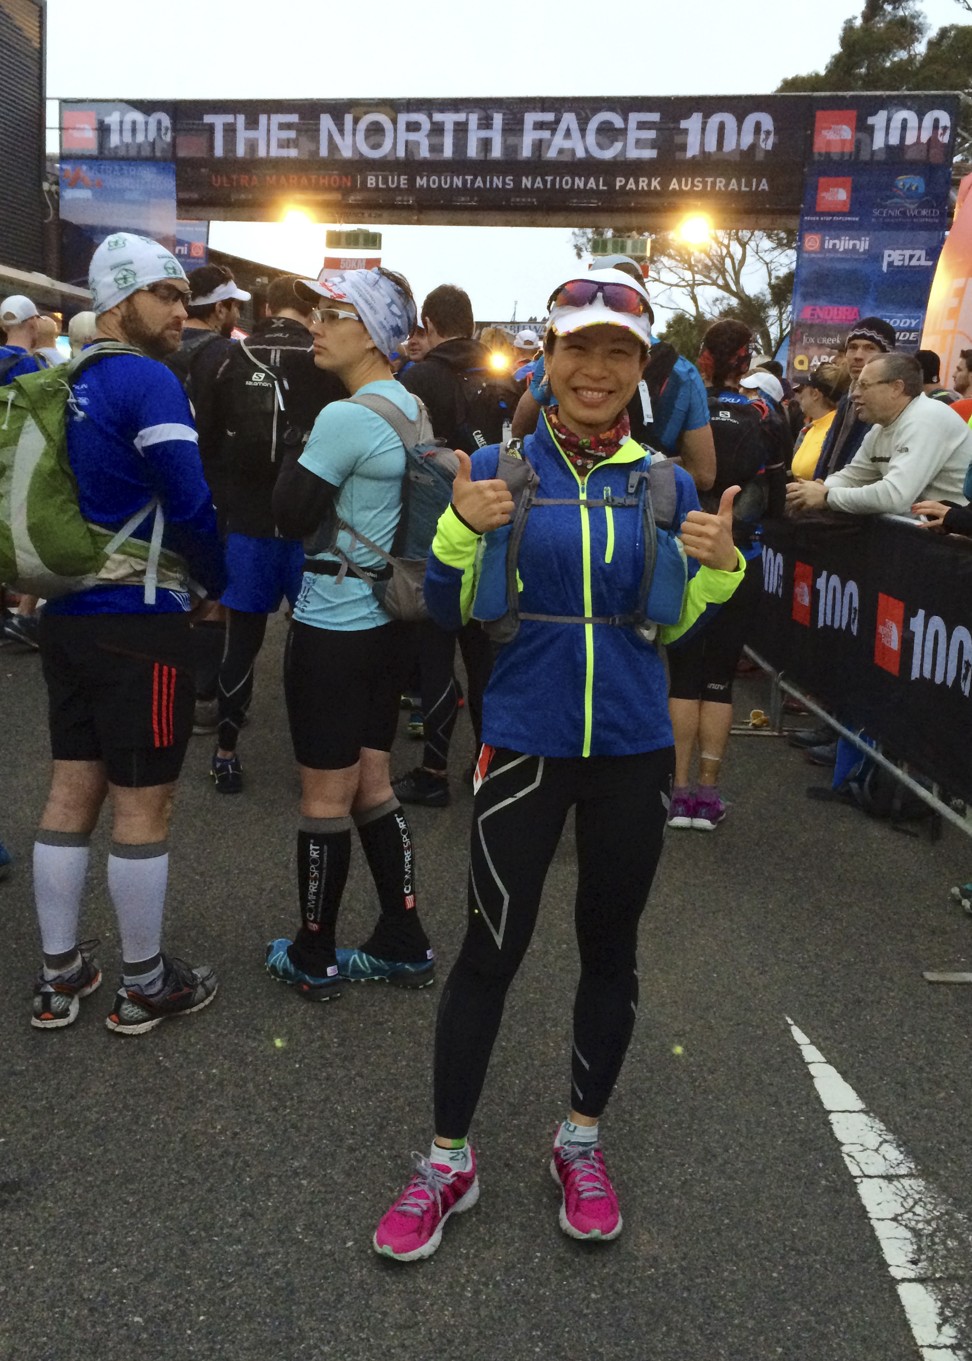 Mak at the starting line of The North Face 100 in 2015.